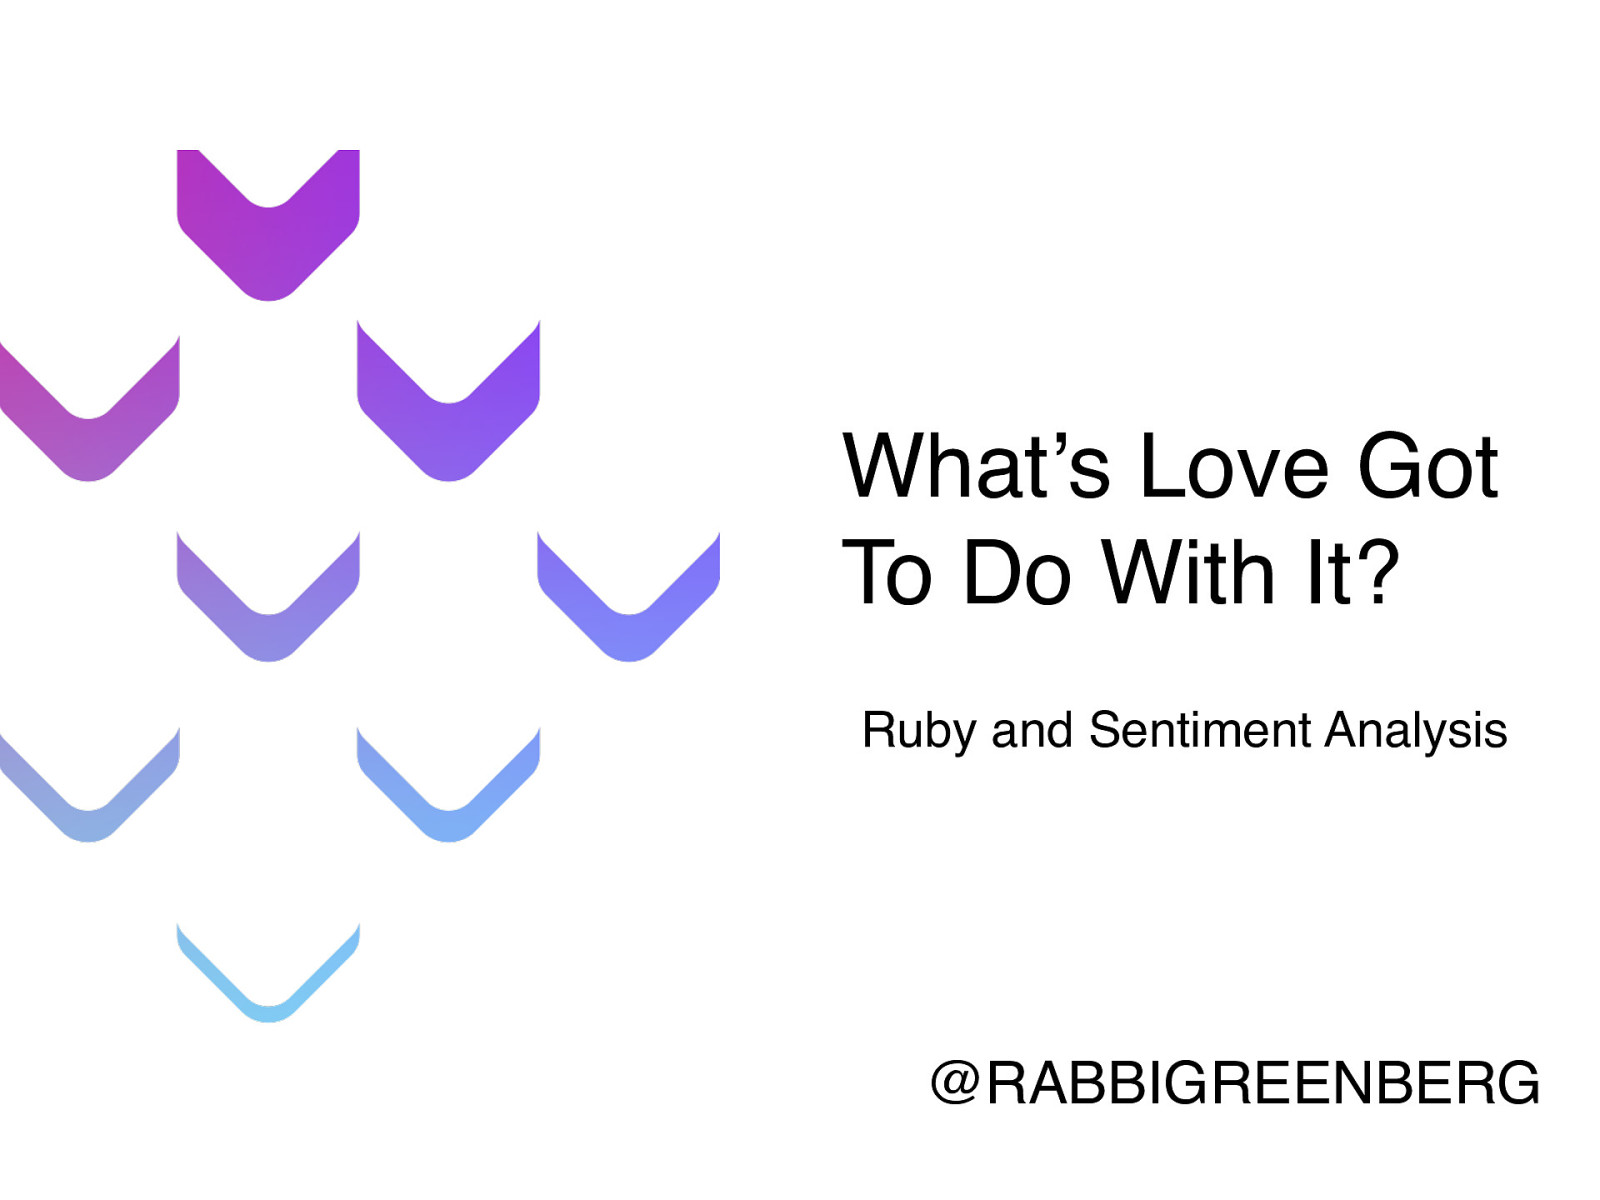 What’s Love Got To Do With It? Ruby and Sentiment Analysis